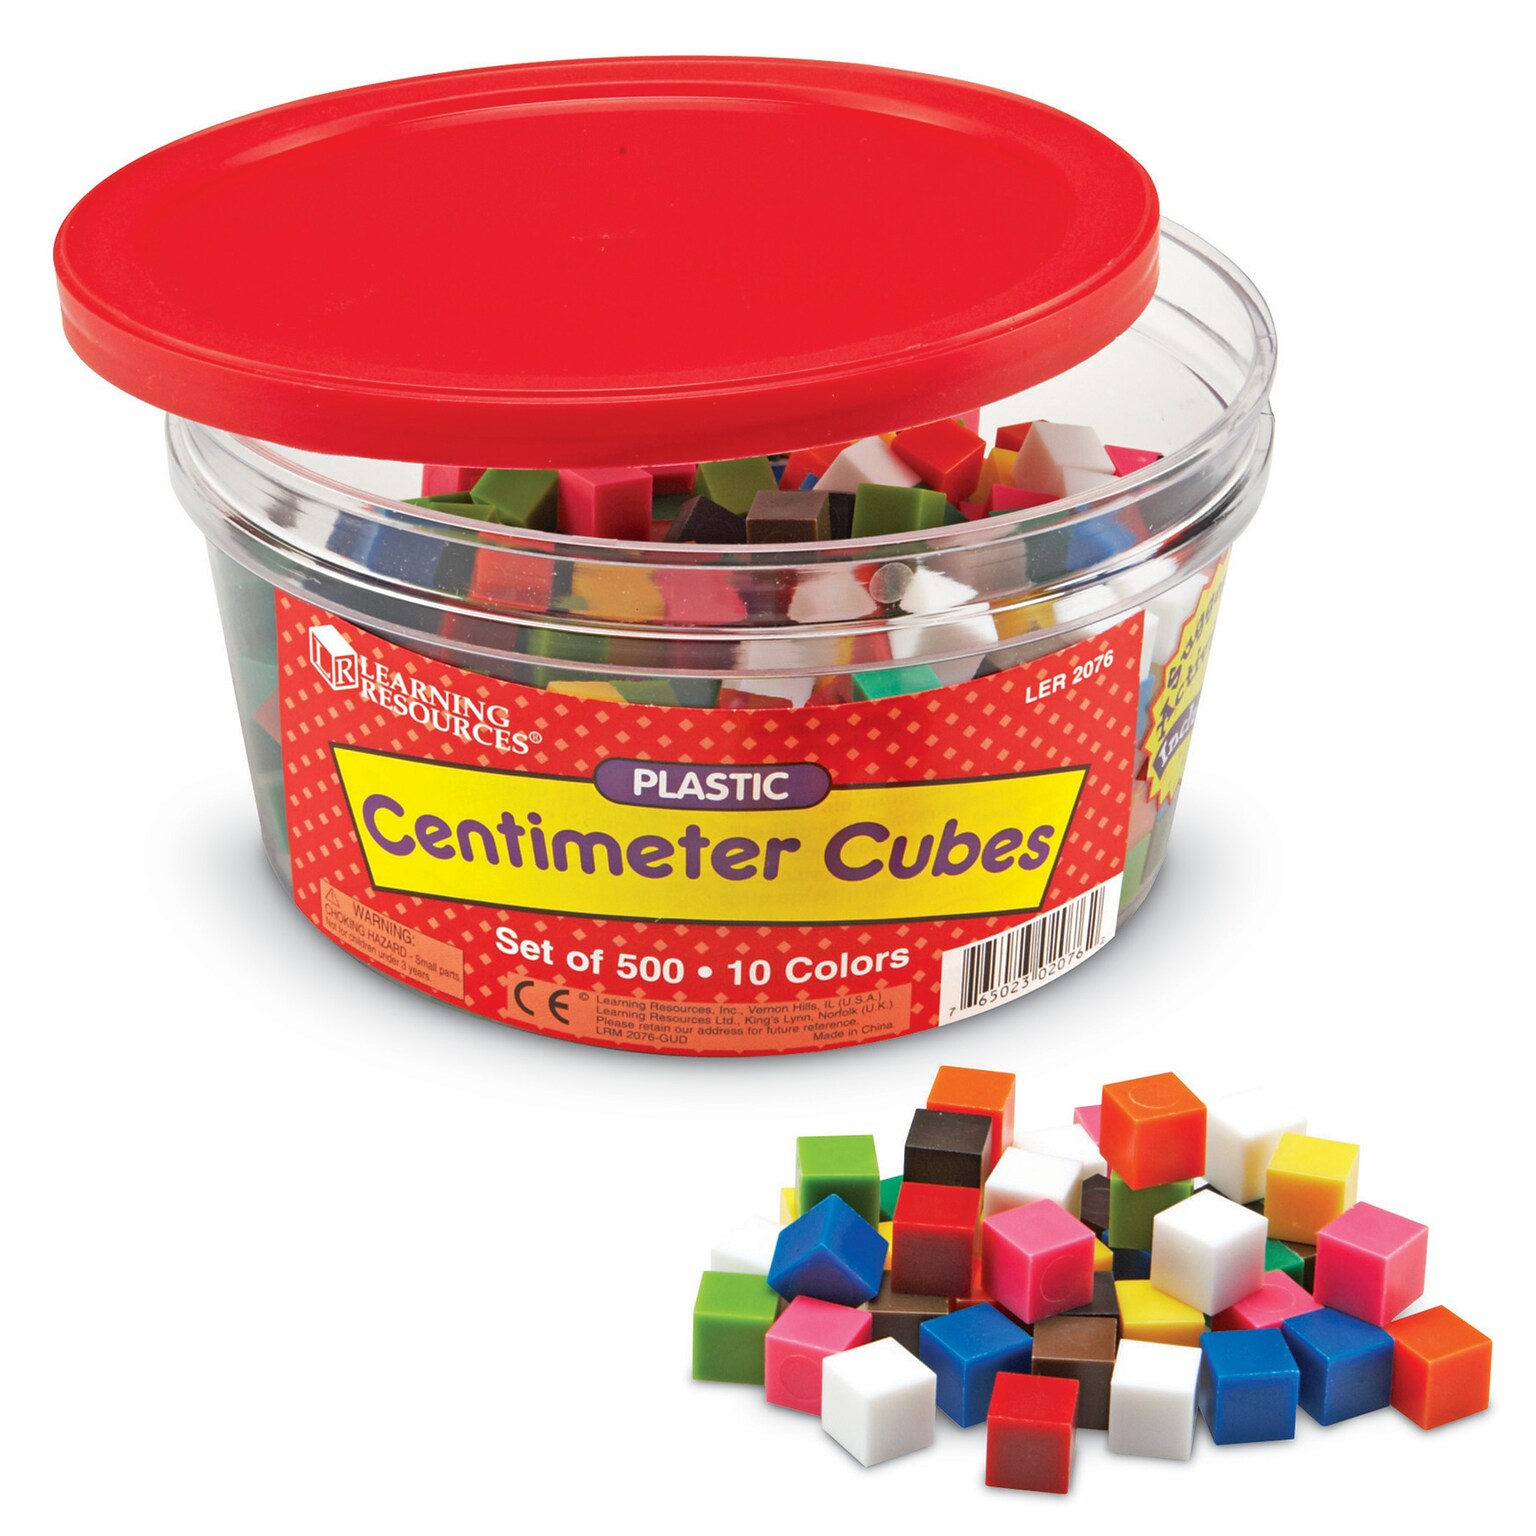 Learning Resources Centimeter Cubes, Pack of 500 (LER2076)